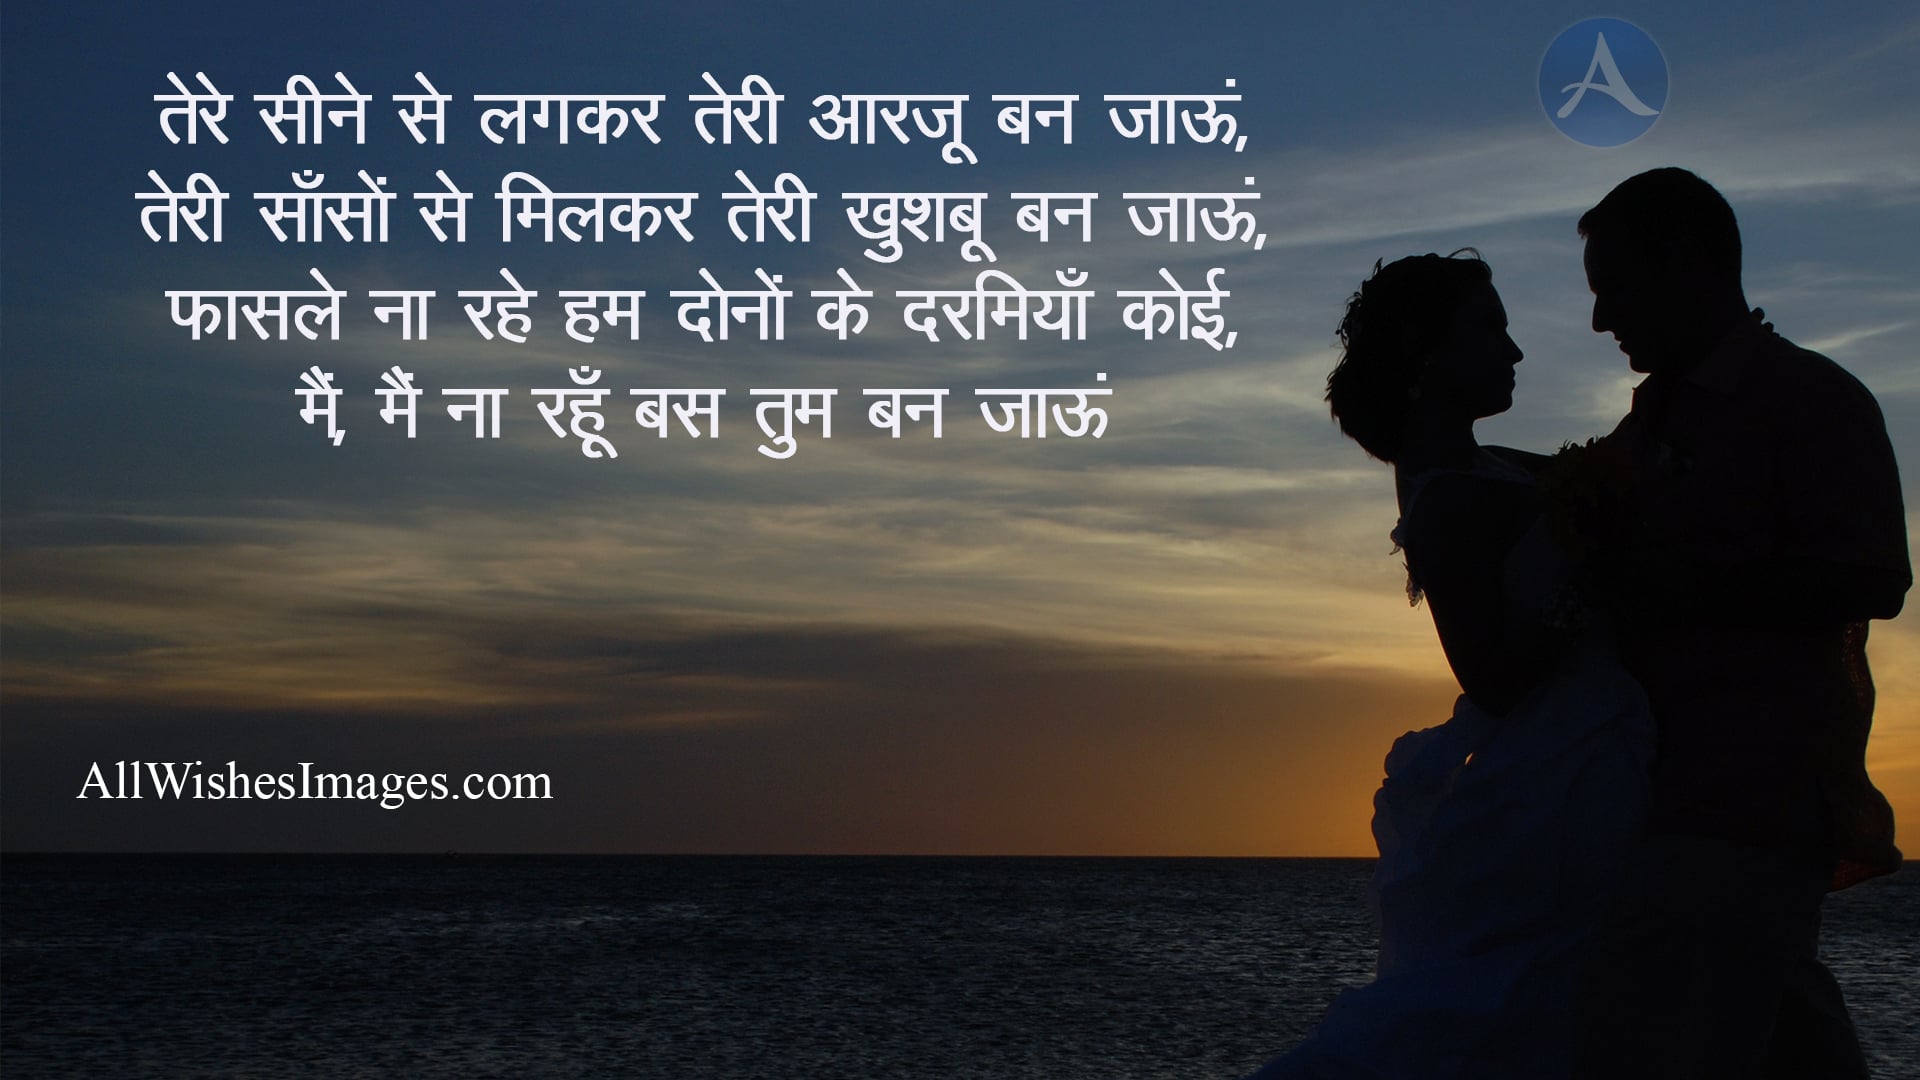 Love Shayari In Hindi For Boyfriend With Images Download - All Wishes Images  - Images for WhatsApp